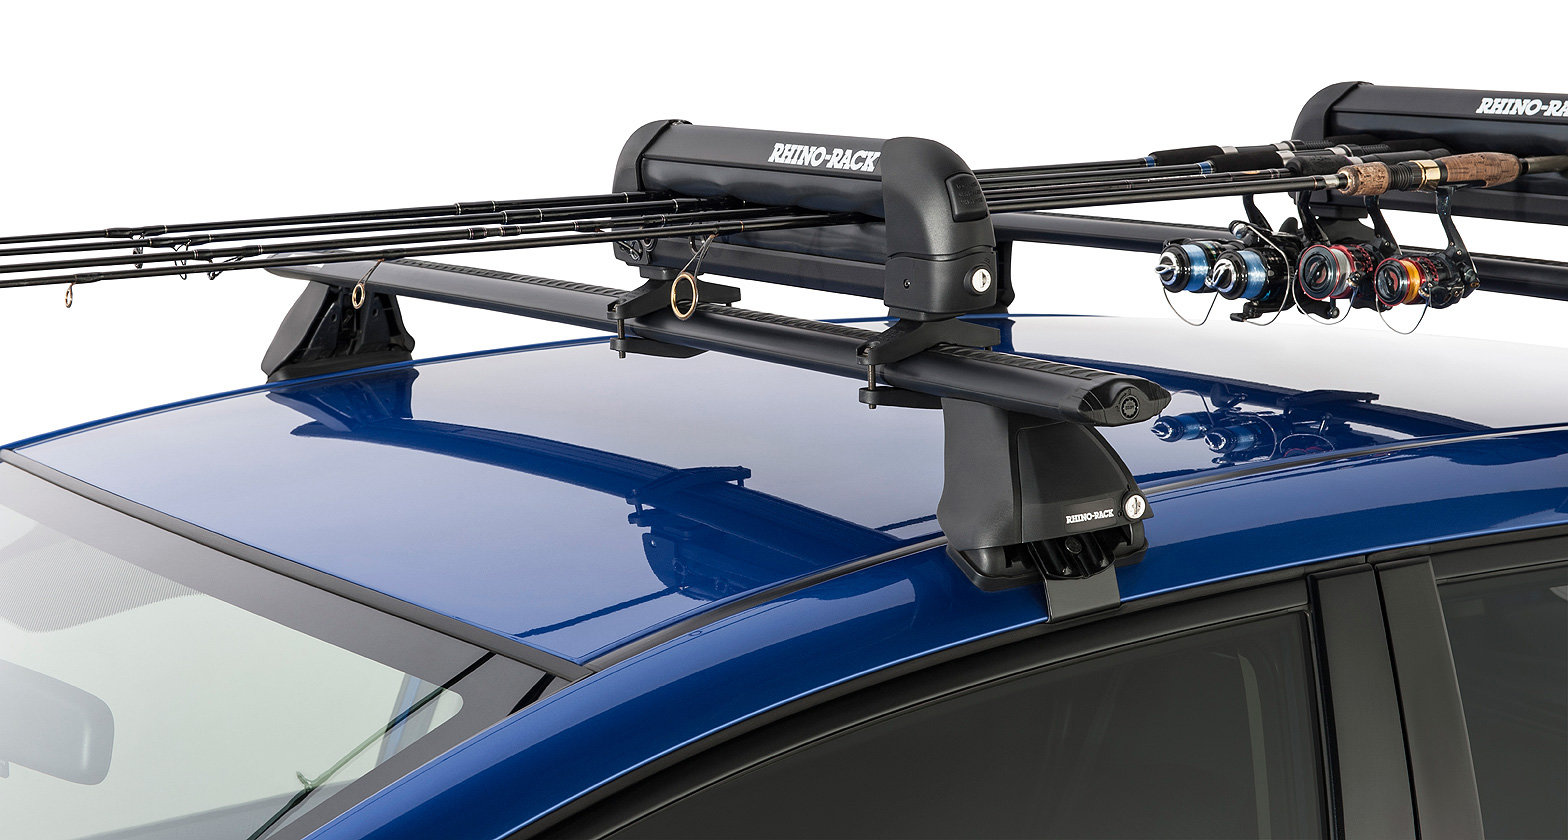 https://www.quadratec.com/sites/default/files/styles/product_zoomed/public/product_images/rhino-rack-ski-snowboard-carrier-573-fishing-rods.jpg